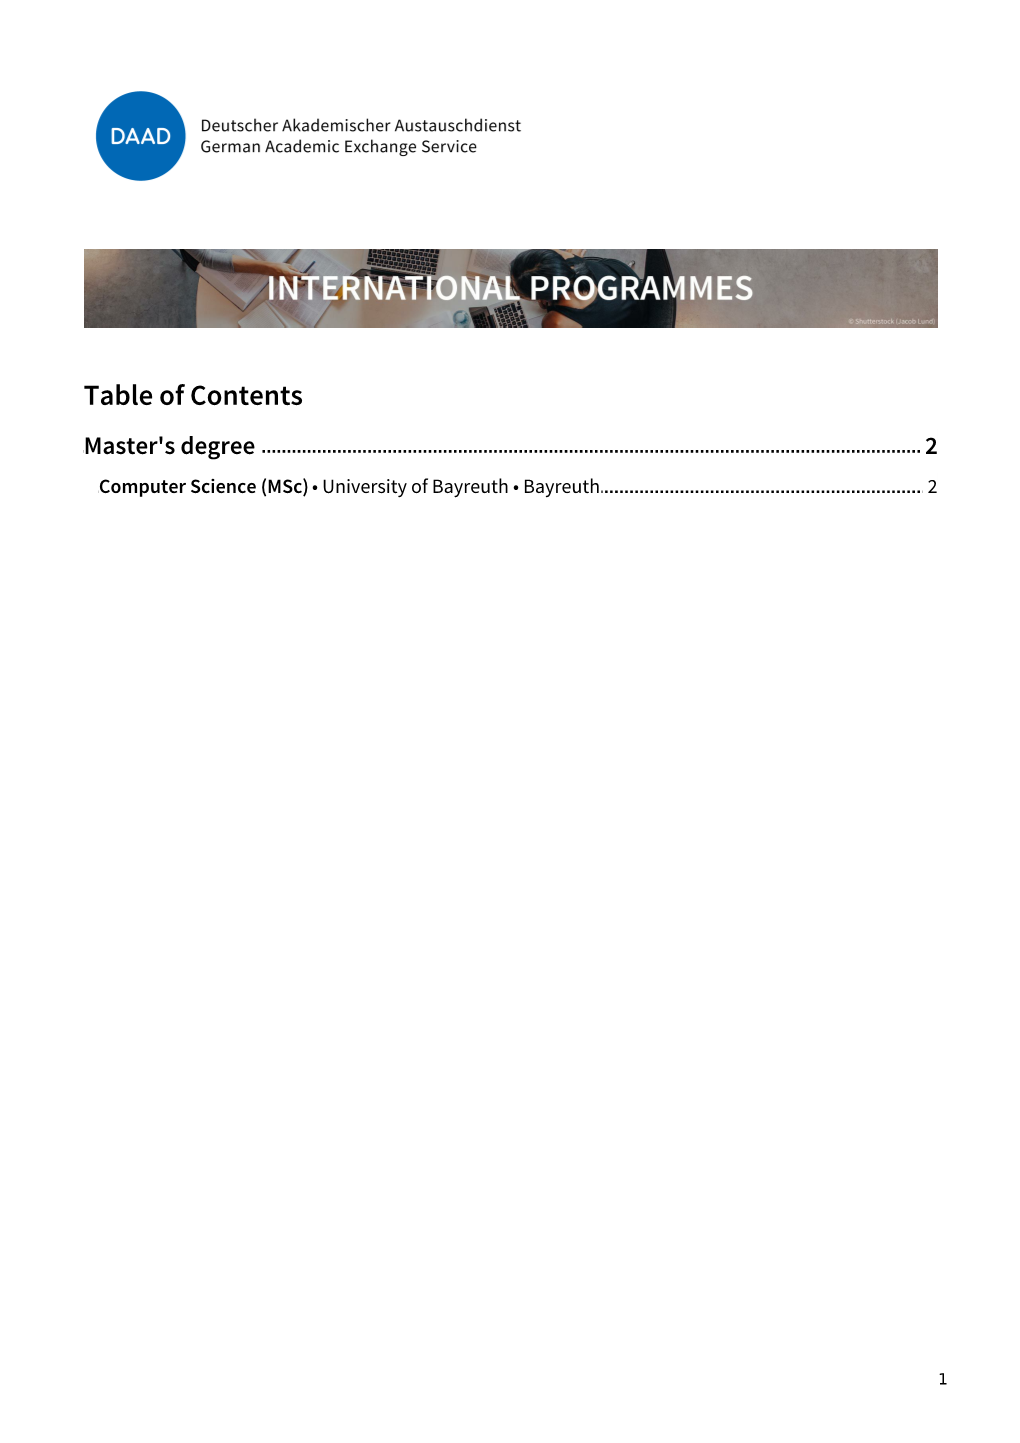 Table of Contents Master's Degree 2 Computer Science (Msc) • University of Bayreuth • Bayreuth 2